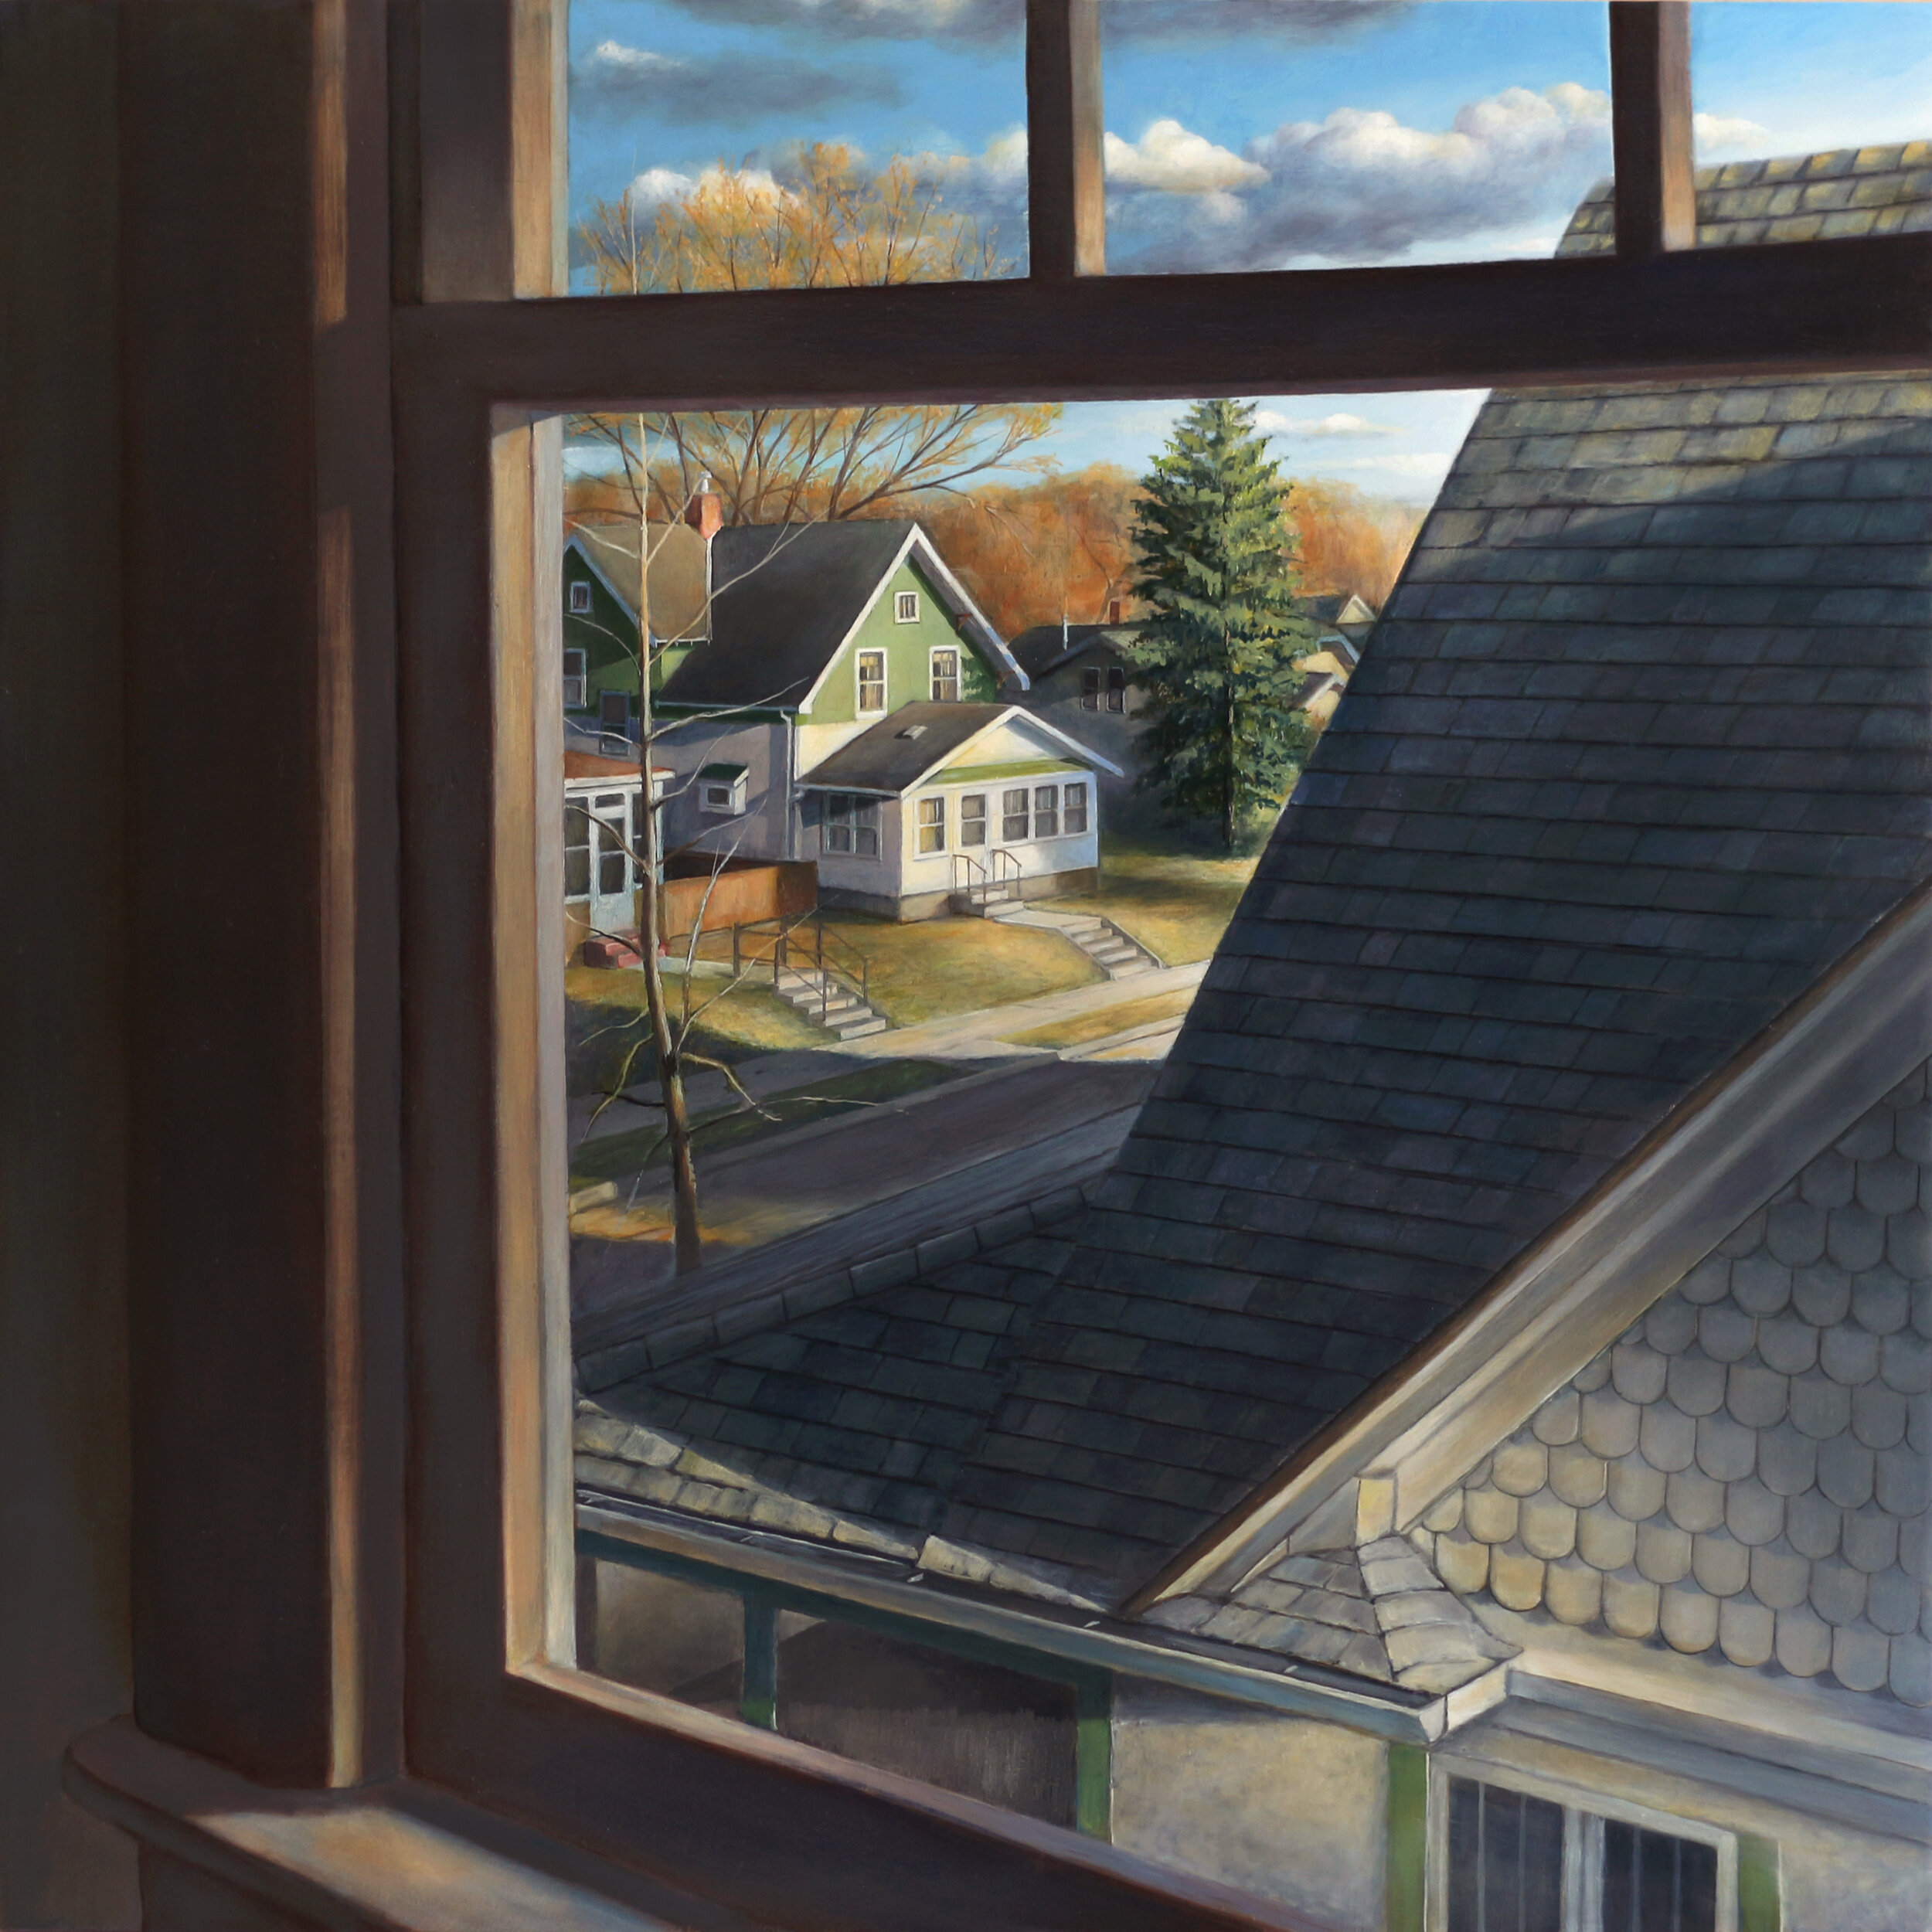   Neighborhood Houses     in Evening Light   2020  Oil on panel  24 x 24 inches     